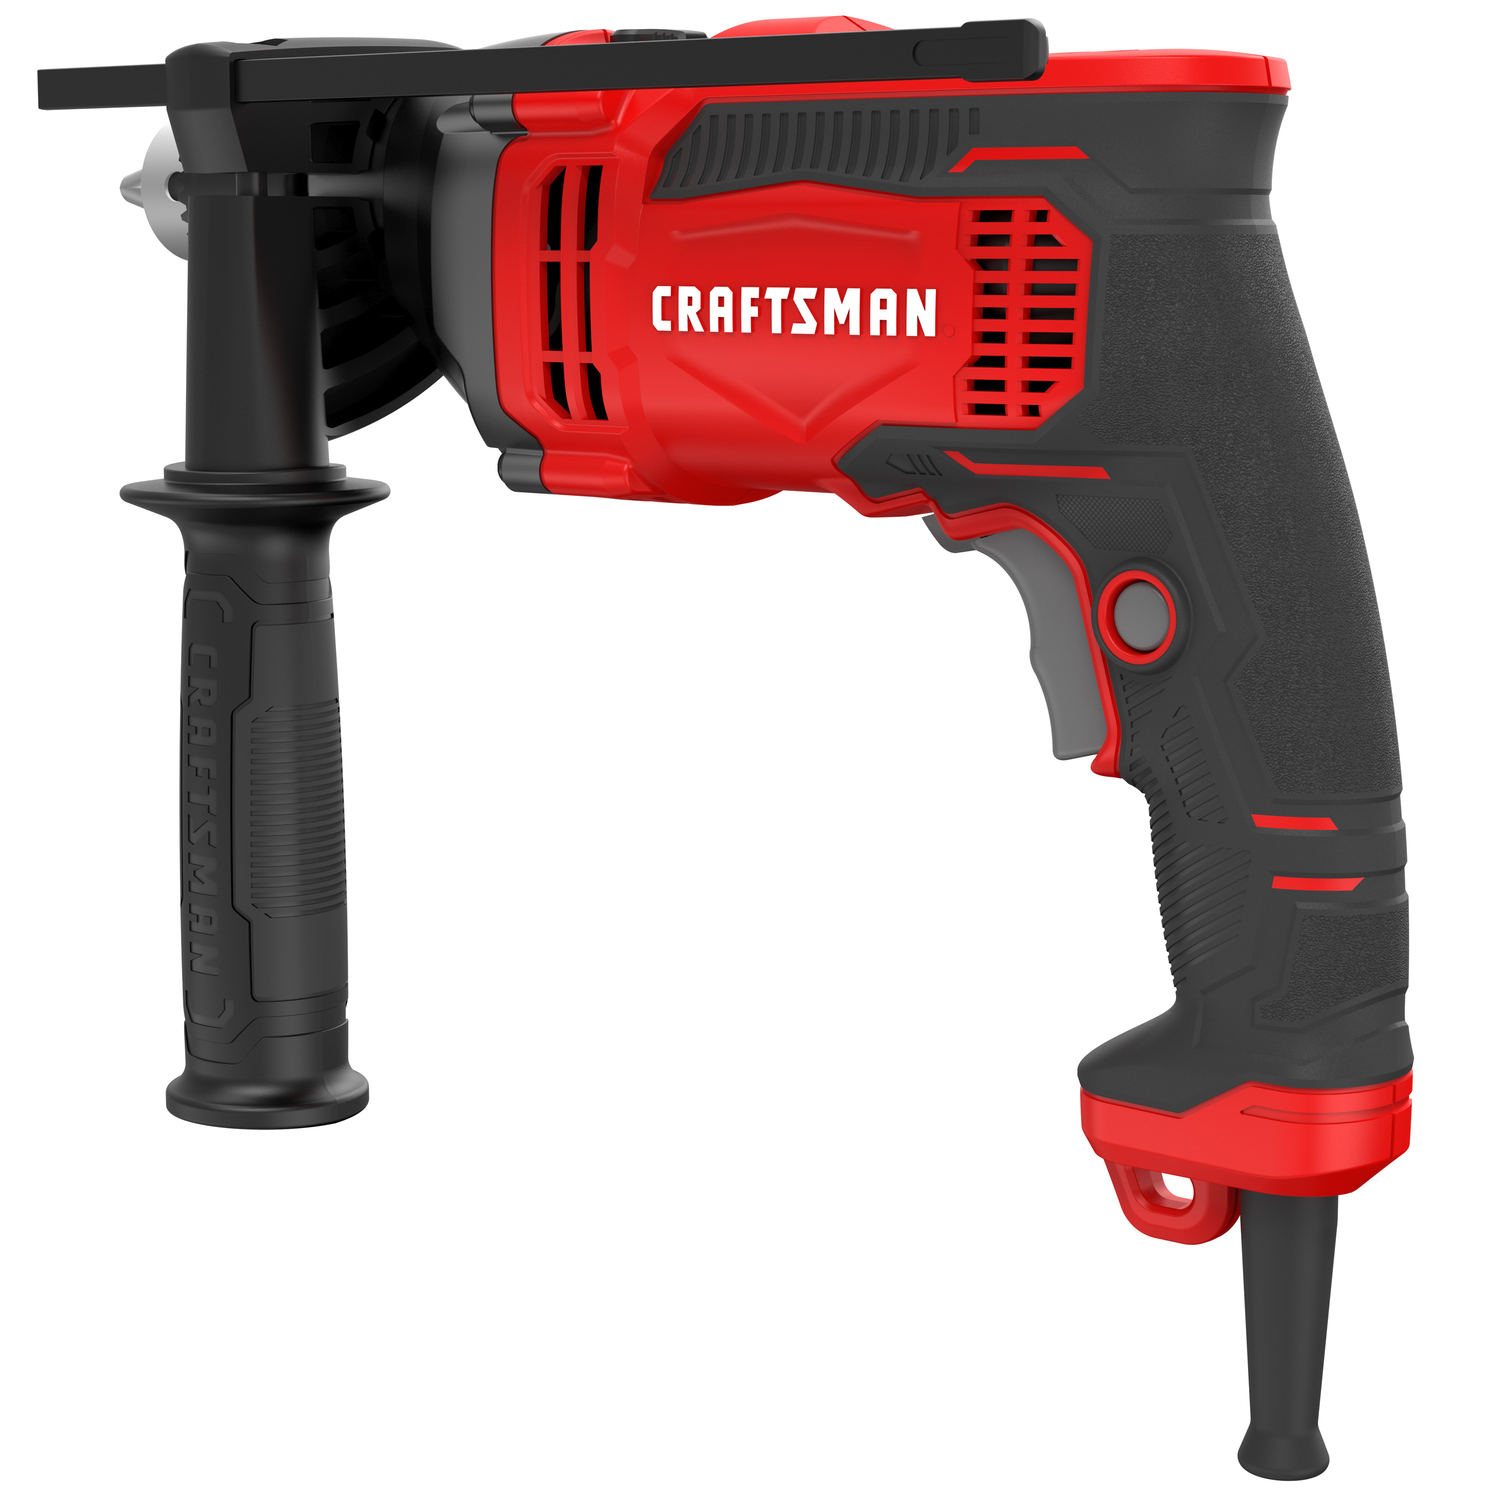 UPC 885911548953 product image for Craftsman 1/2 in. Keyed Corded Hammer Drill Kit 7 amps 3100 rpm 52700 bpm Red | upcitemdb.com